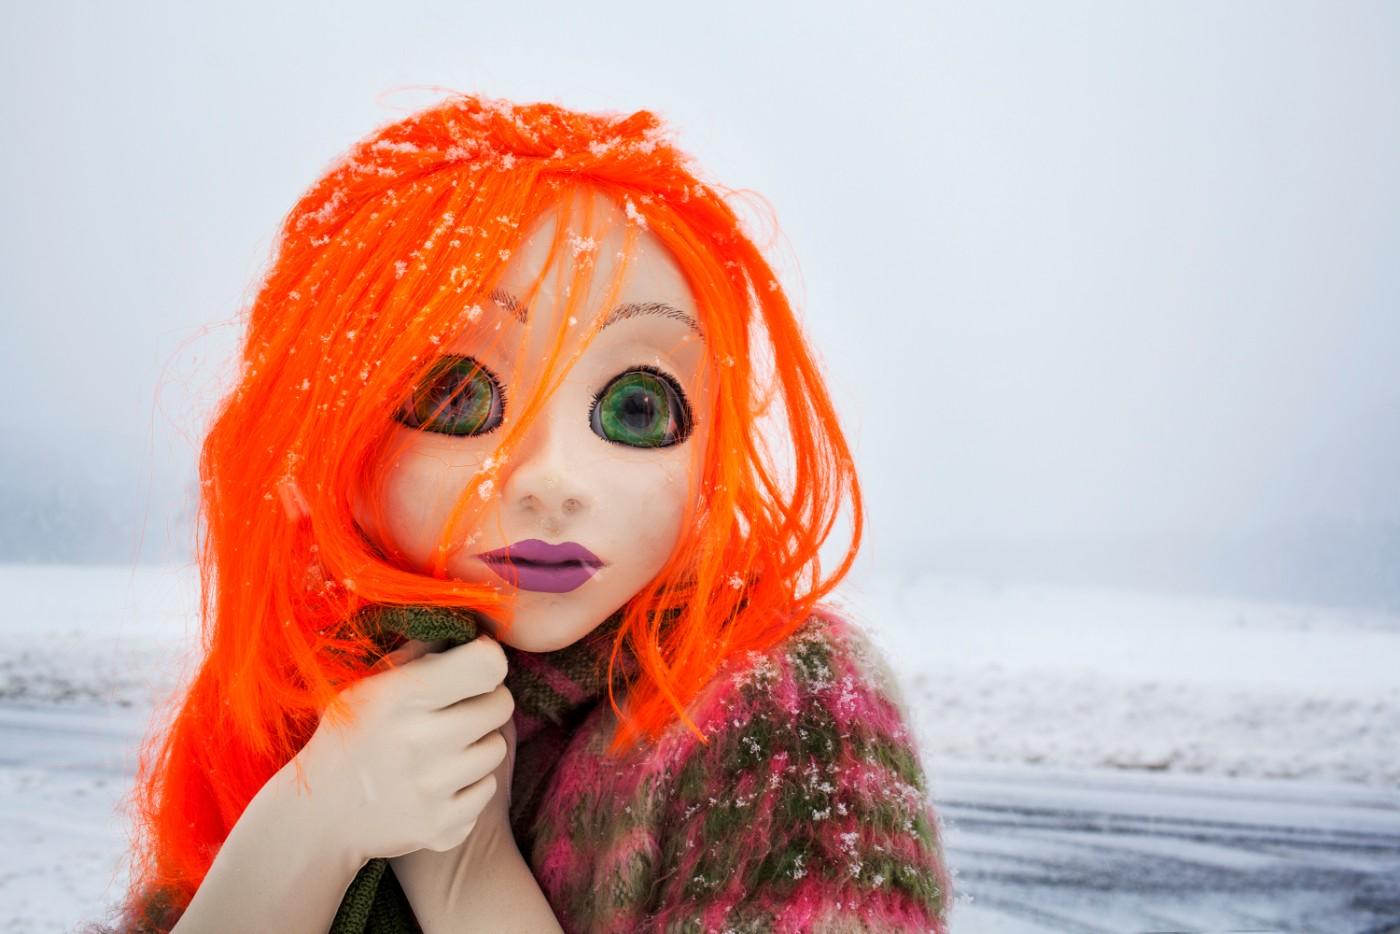 Laurie Simmons, Orange Hair/Snow/Close Up, 2014